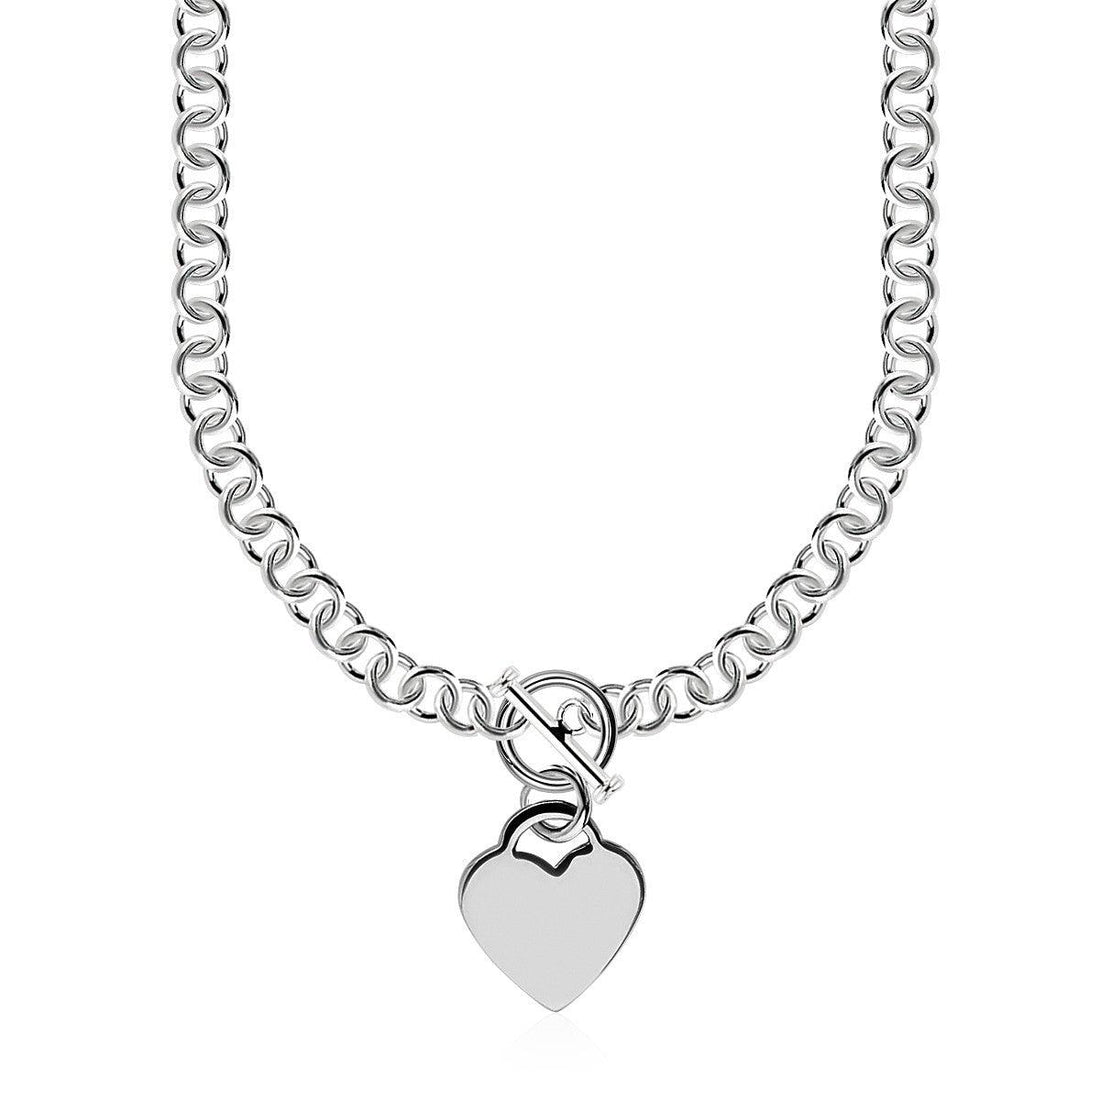  Sterling Silver Rolo Chain with a Heart Toggle Charm and Rhodium Plating - Diamond Designs